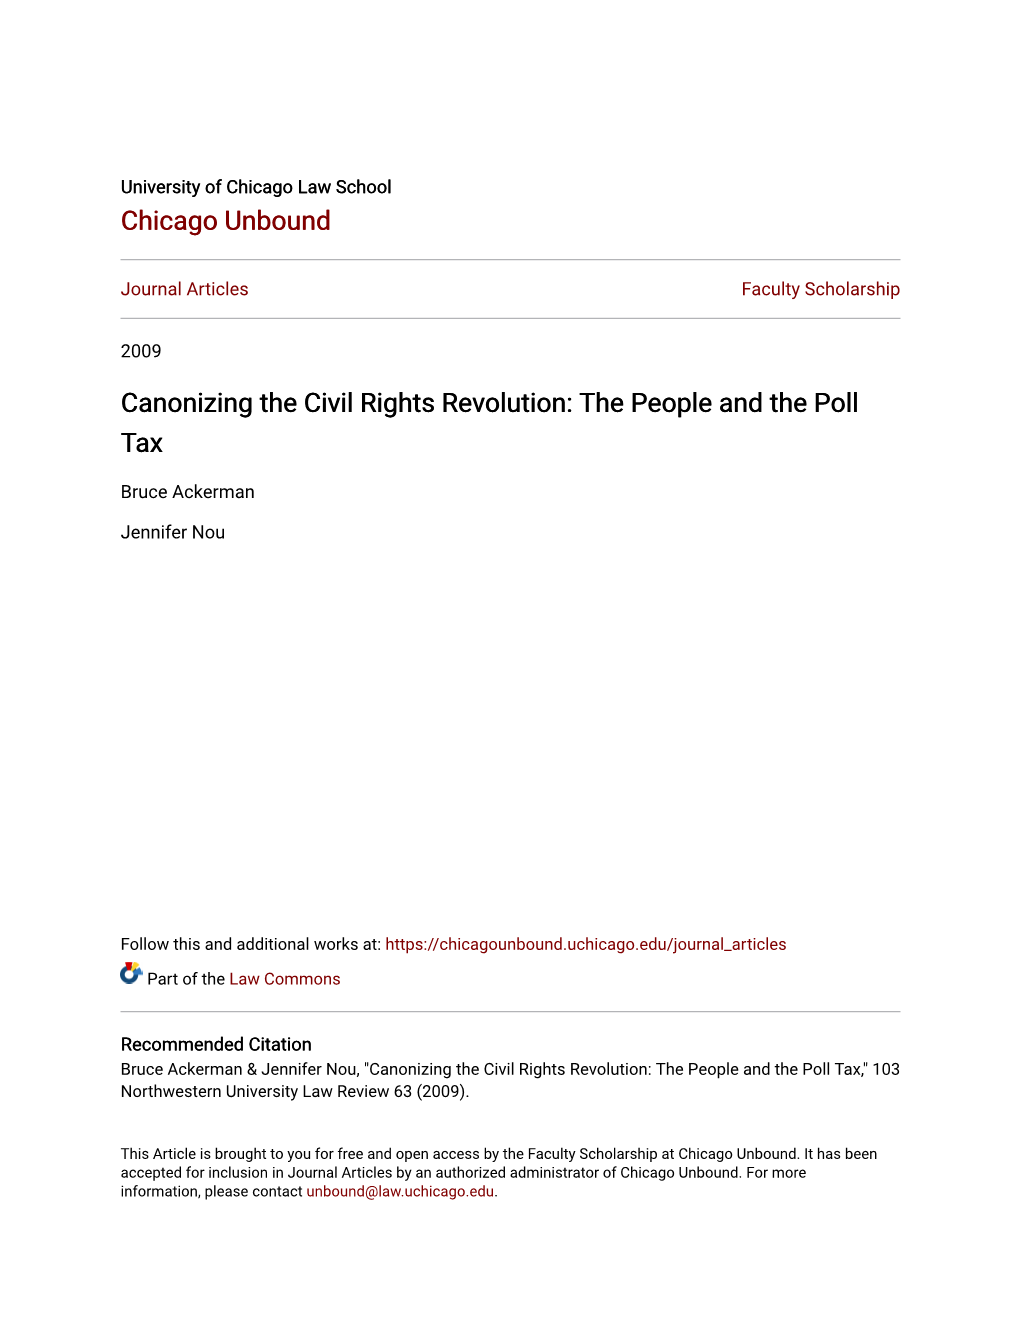 Canonizing the Civil Rights Revolution: the People and the Poll Tax